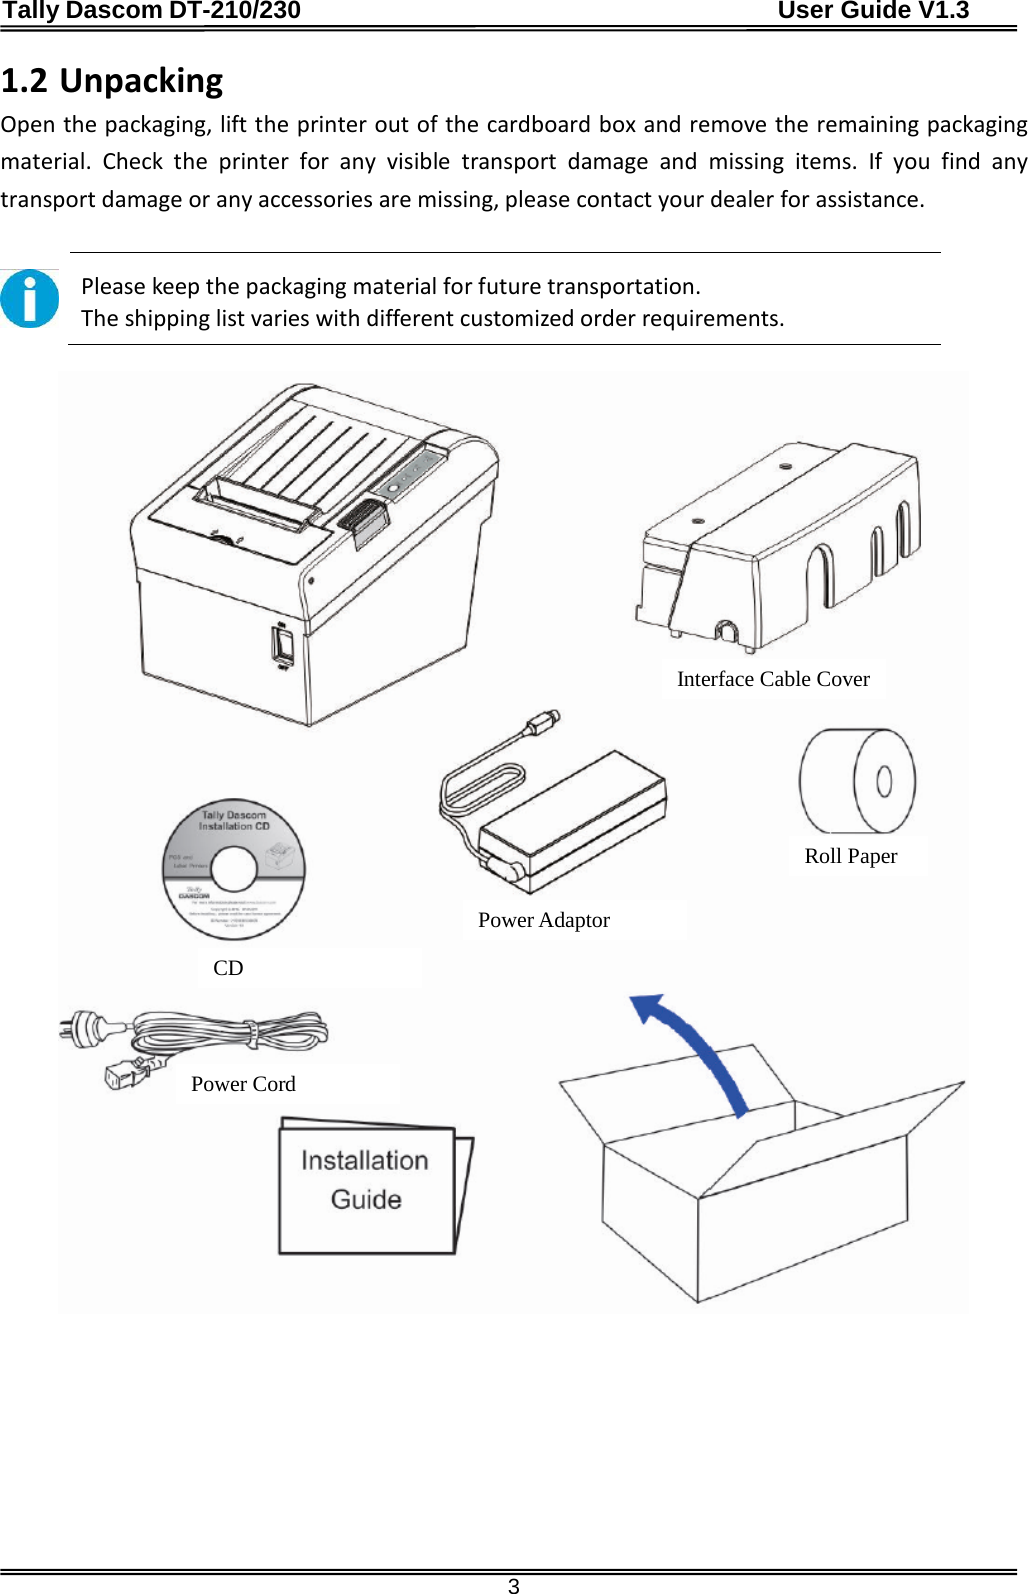 Tally Dascom DT-210/230                                      User Guide V1.3  3 1.2 Unpacking Open the packaging, lift the printer out of the cardboard box and remove the remaining packaging material.  Check the printer for any visible transport damage and missing items. If you find any transport damage or any accessories are missing, please contact your dealer for assistance.   Please keep the packaging material for future transportation. The shipping list varies with different customized order requirements.   Interface Cable Cover Power Cord CD Roll Paper Power Adaptor 